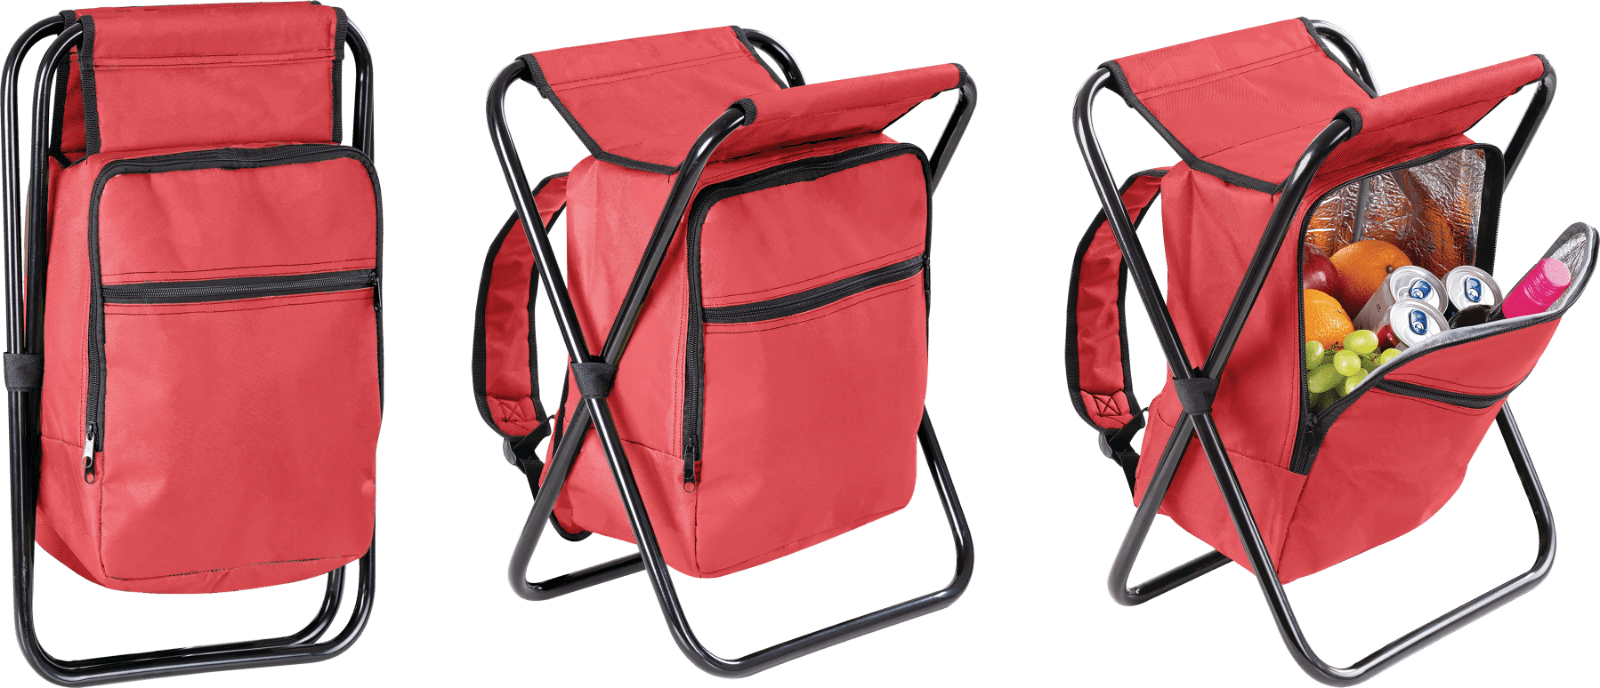 Folding Camping Stool with Tackle Box Hand Carry Bag Backpack, Hiking Seat  Bag Camping Gear for Outdoor Indoor Fishing Travel Beach BBQ 